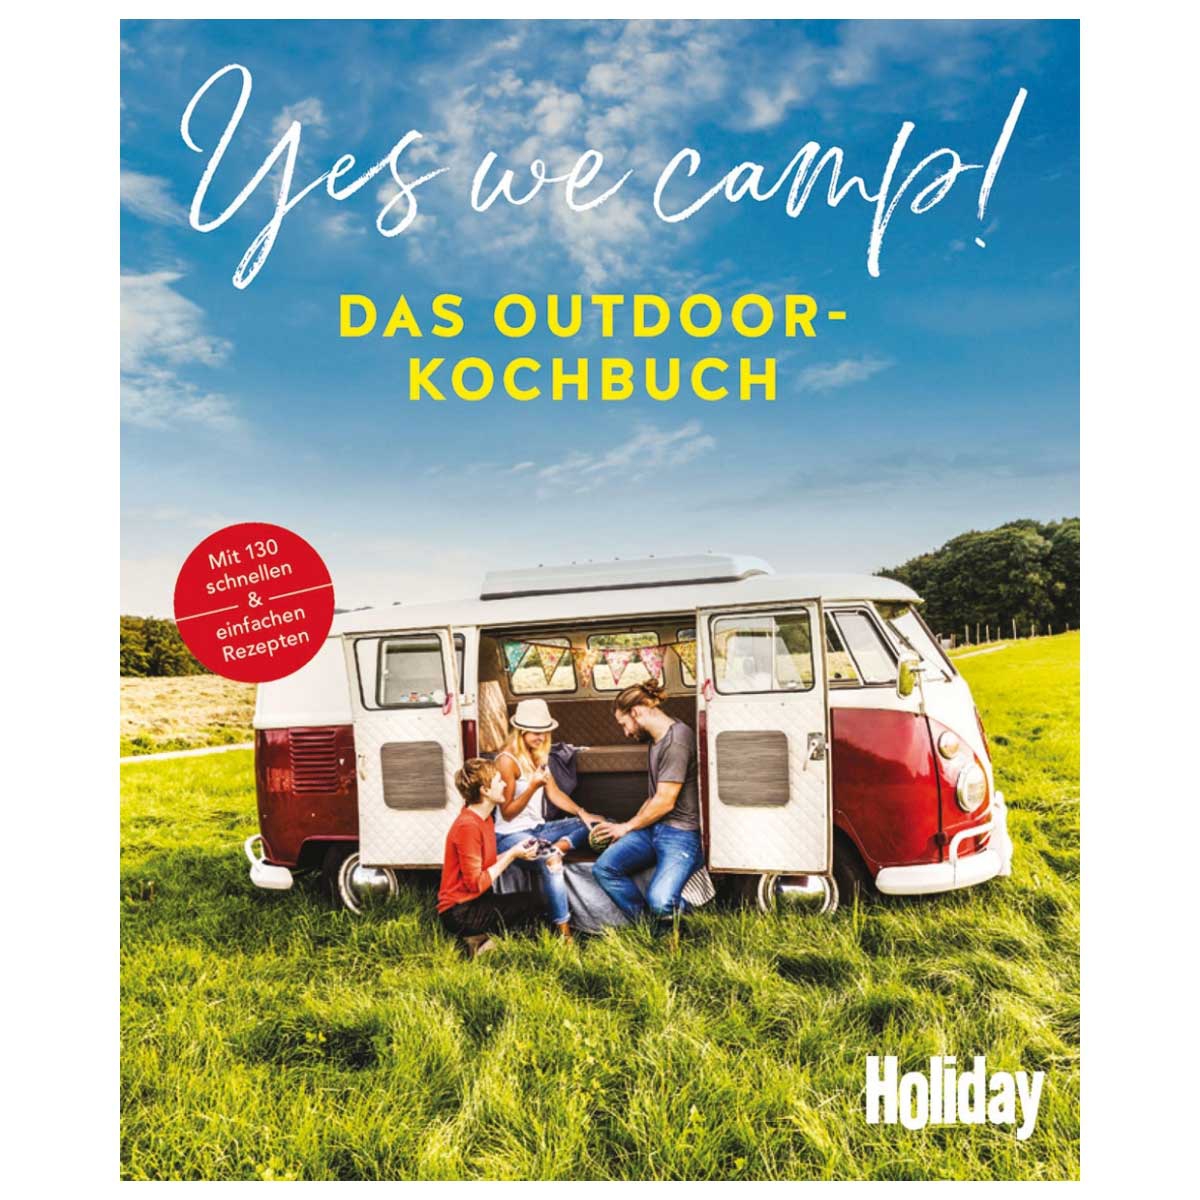 Yes we camp! Das Outdoor-Kochbuch